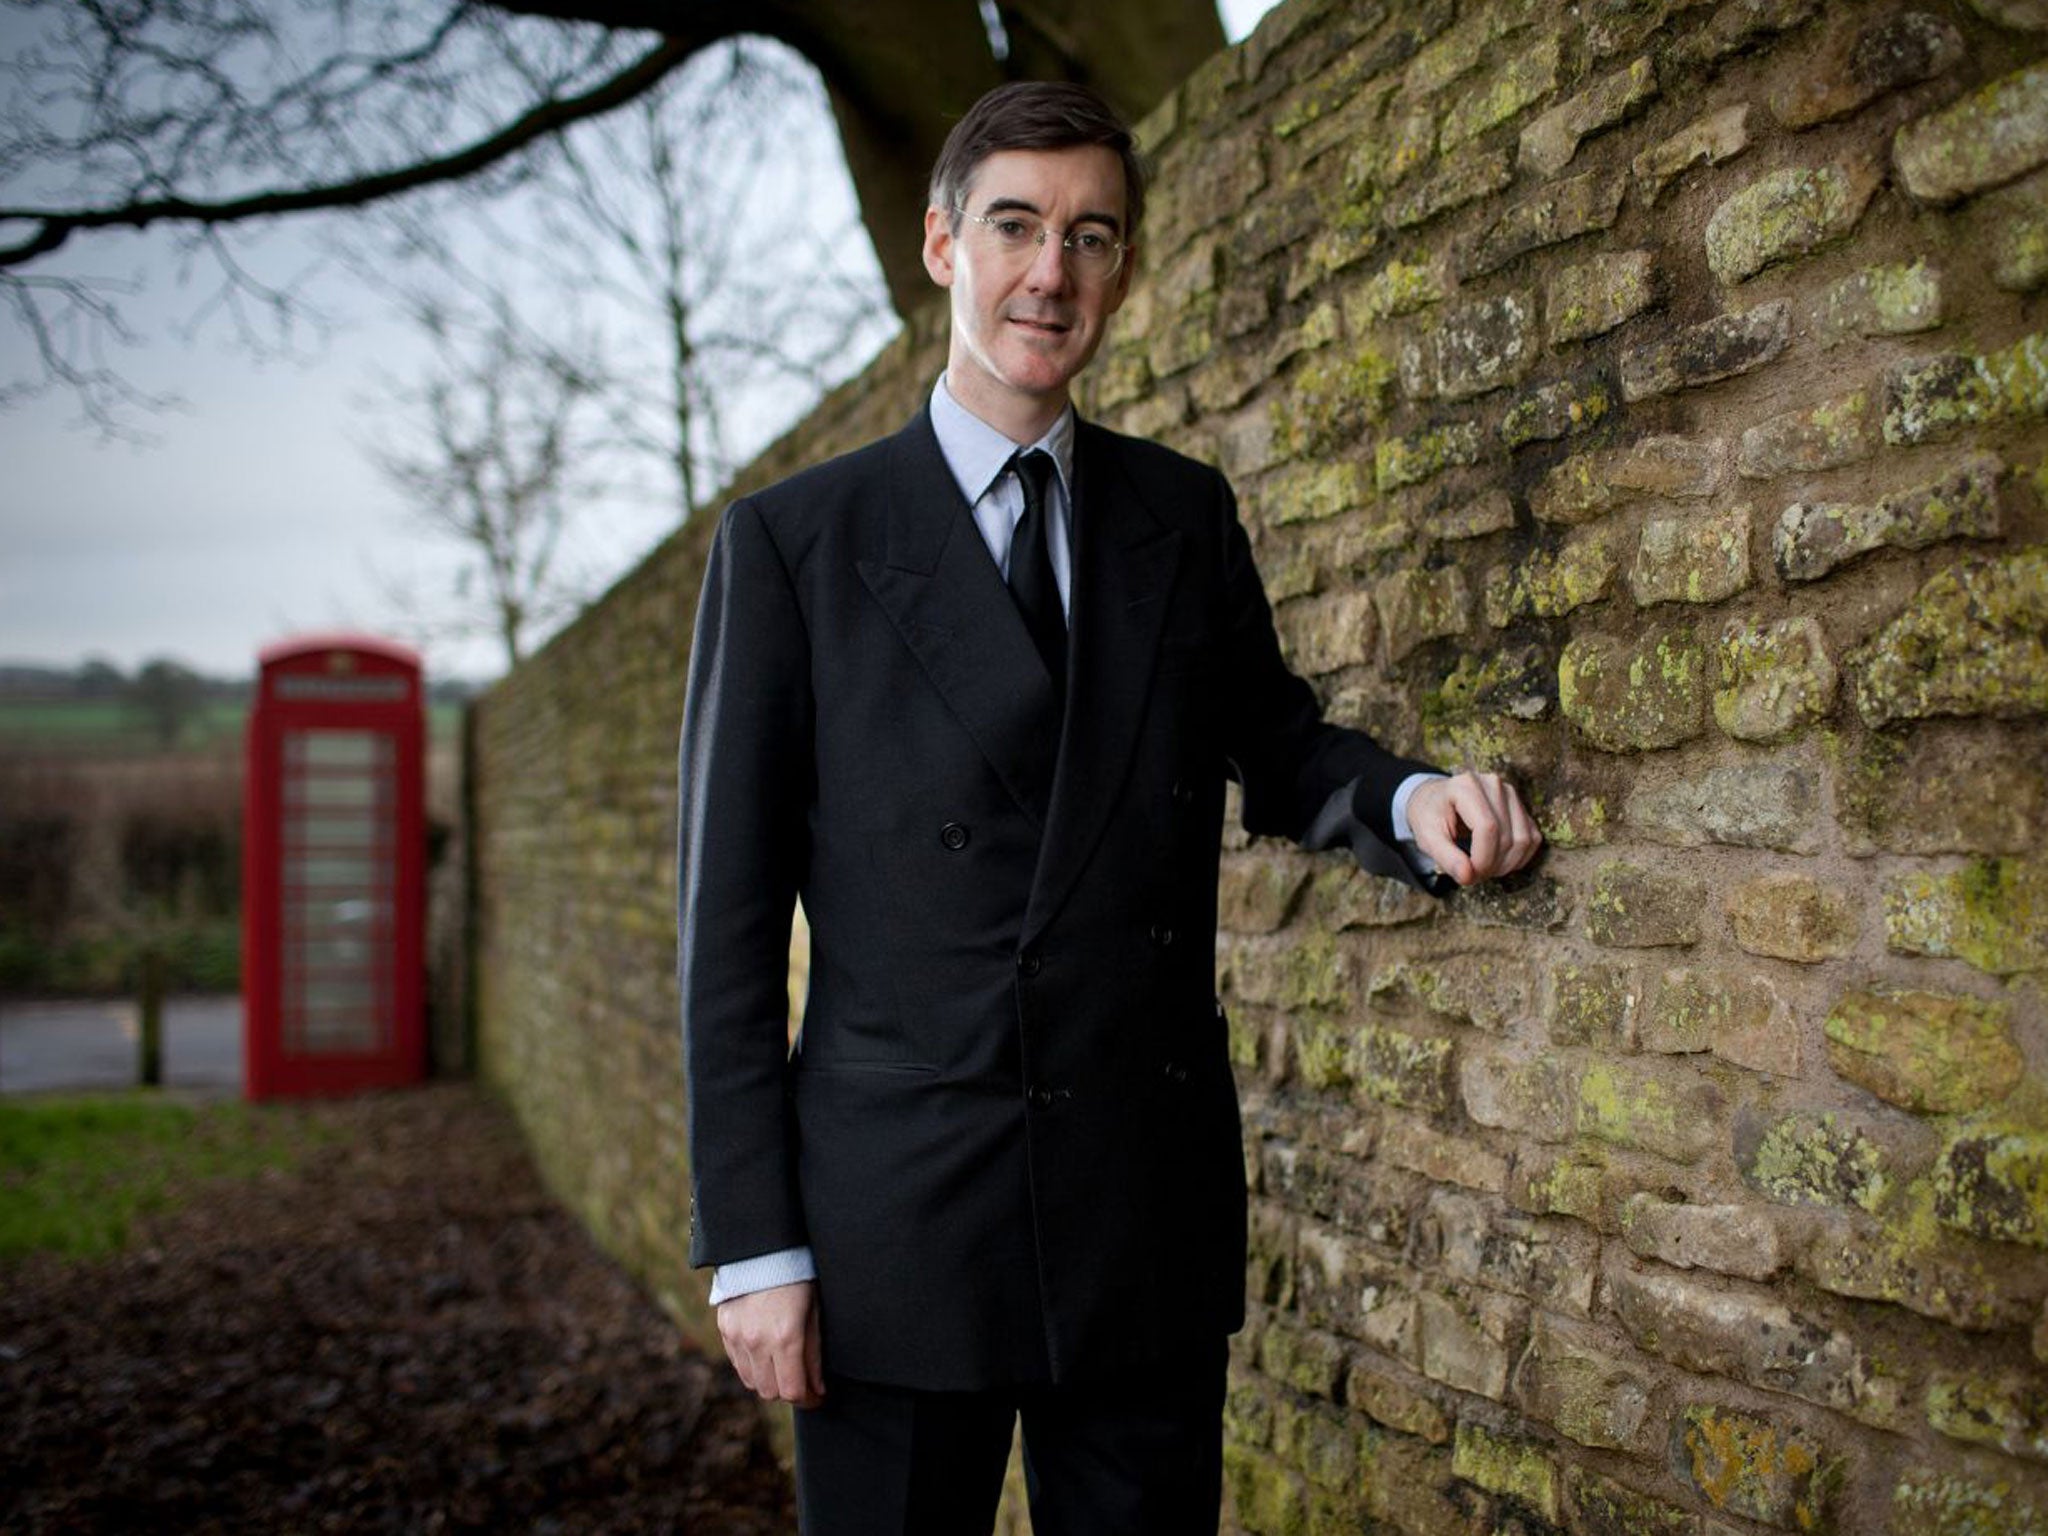 Jacob Rees-Mogg in Hinton Blewett, where he grew up, and is now MP